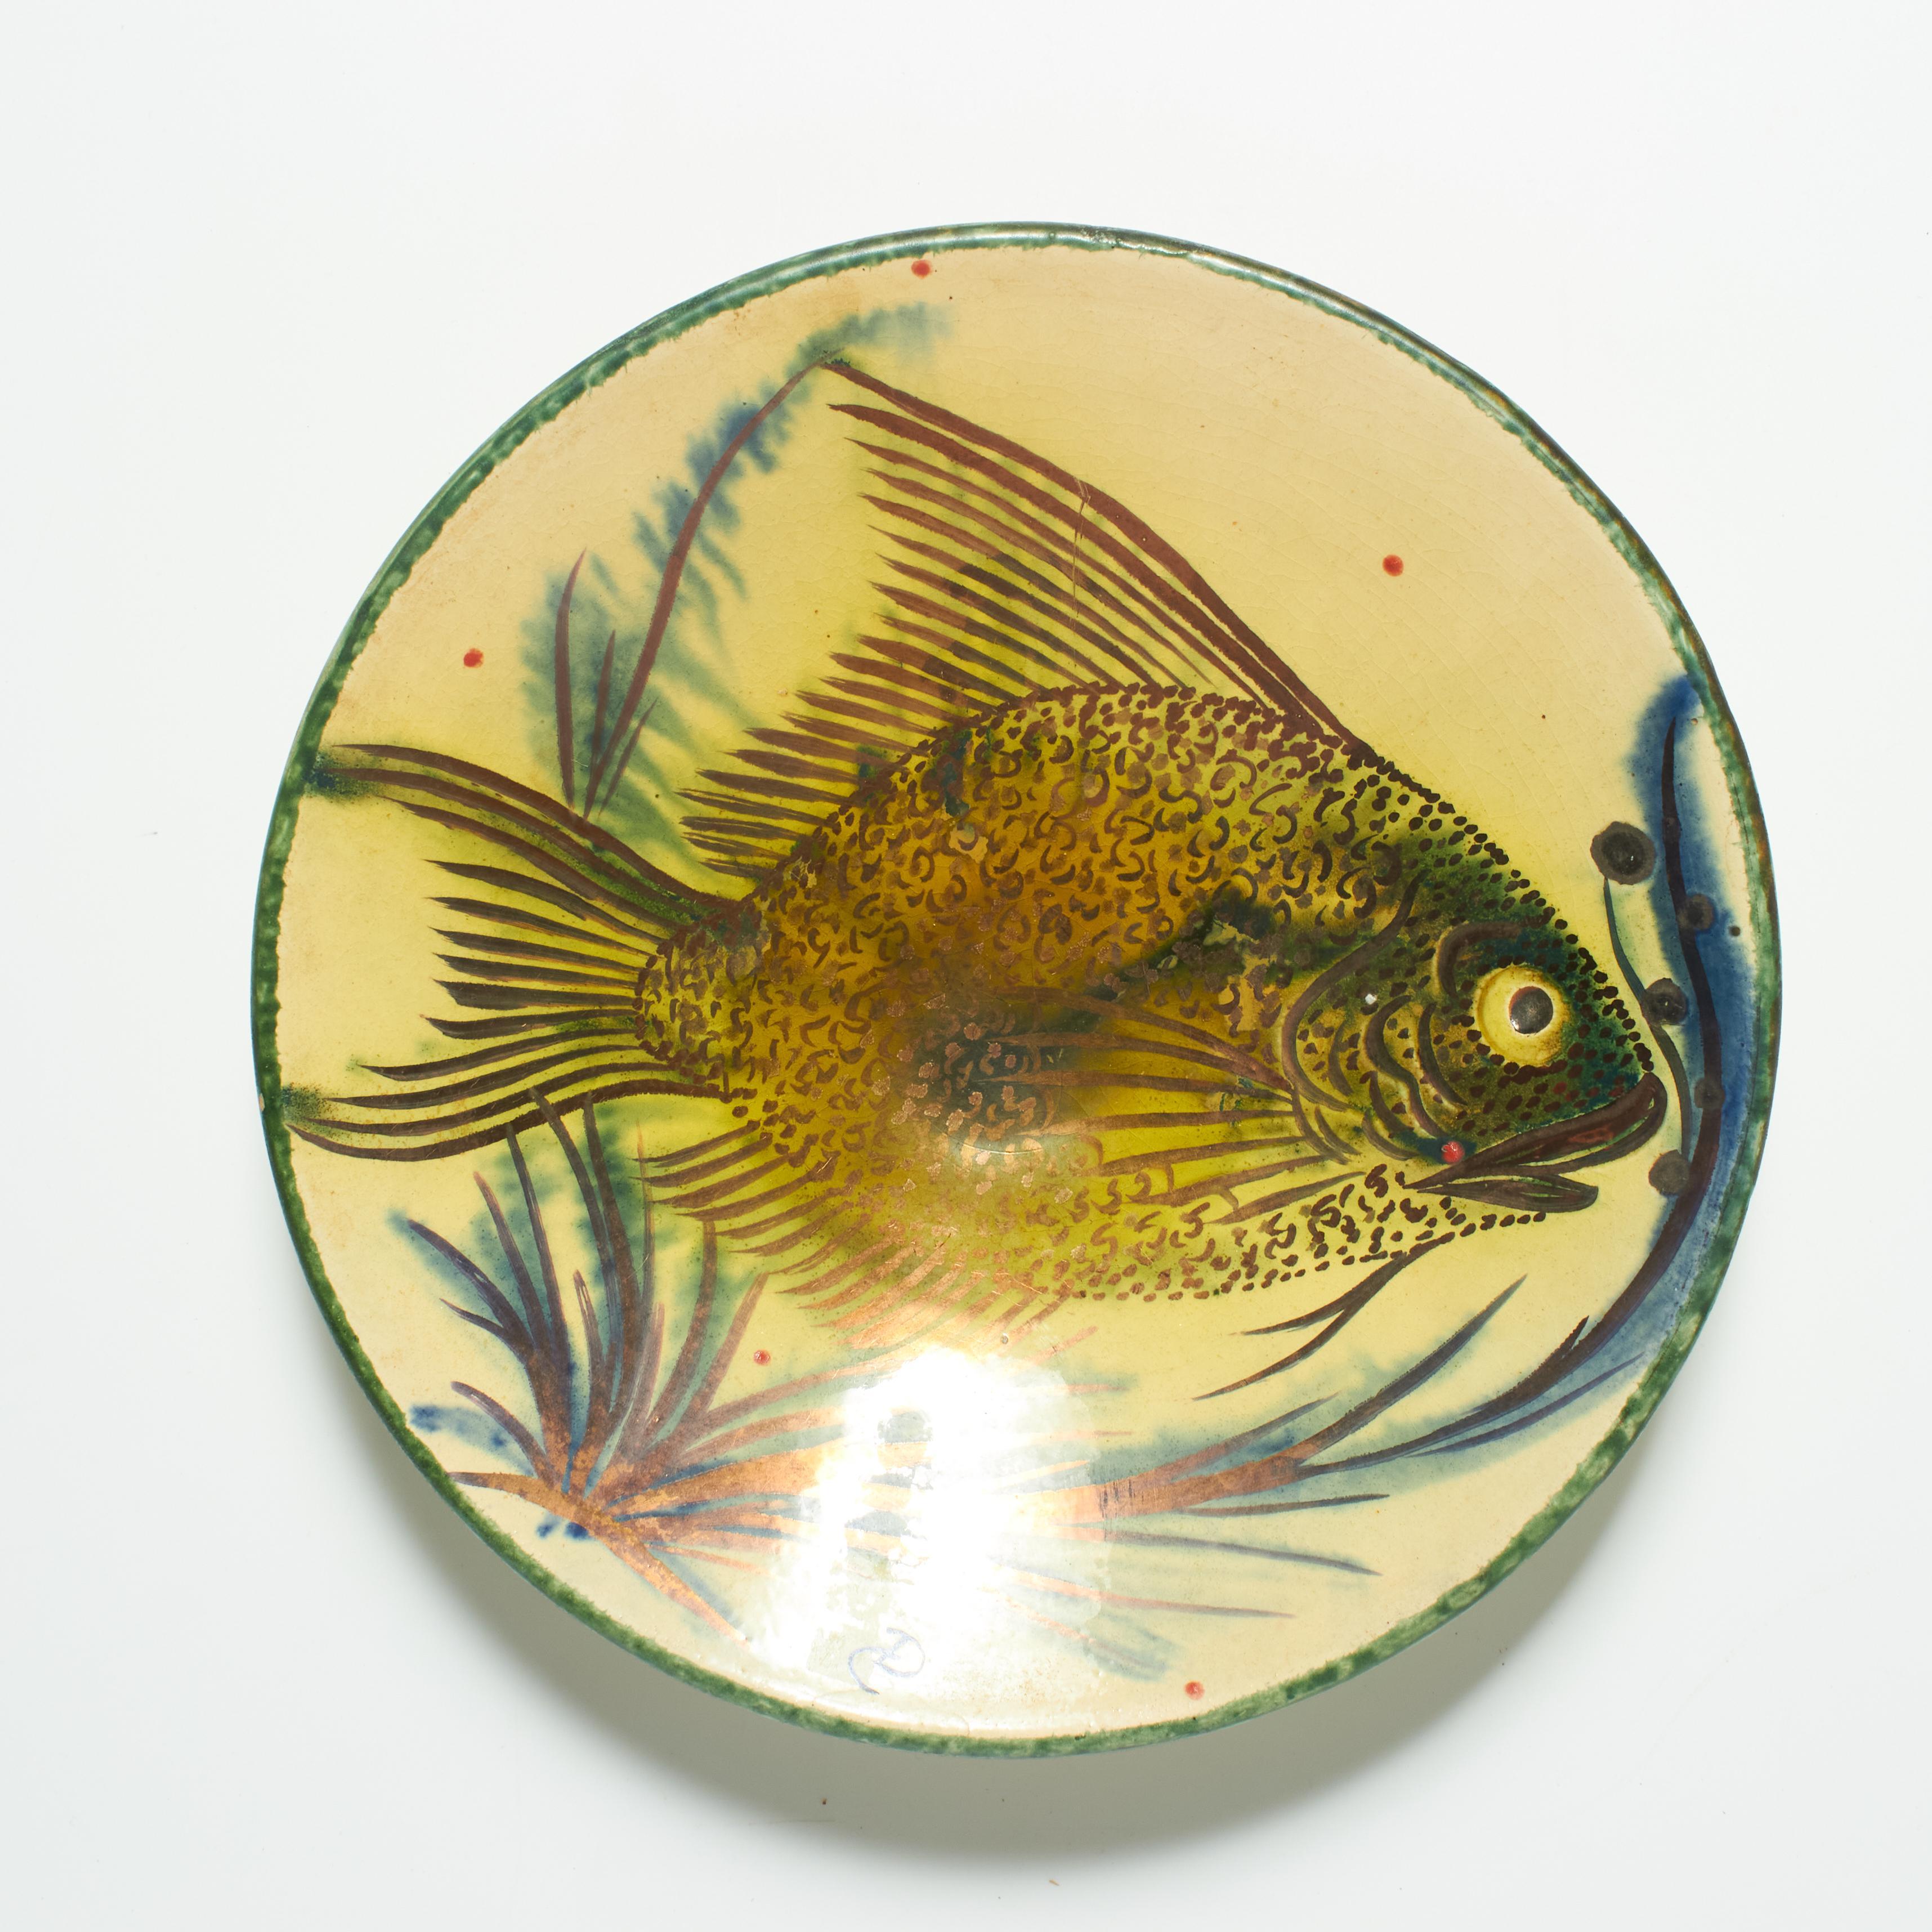 Immerse yourself in the artistic legacy of Catalan artist Diaz Costa with our vintage hand-painted ceramic plate artwork, circa 1960. This exquisite piece captures the essence of mid-century design, showcasing Diaz Costa's craftsmanship and unique